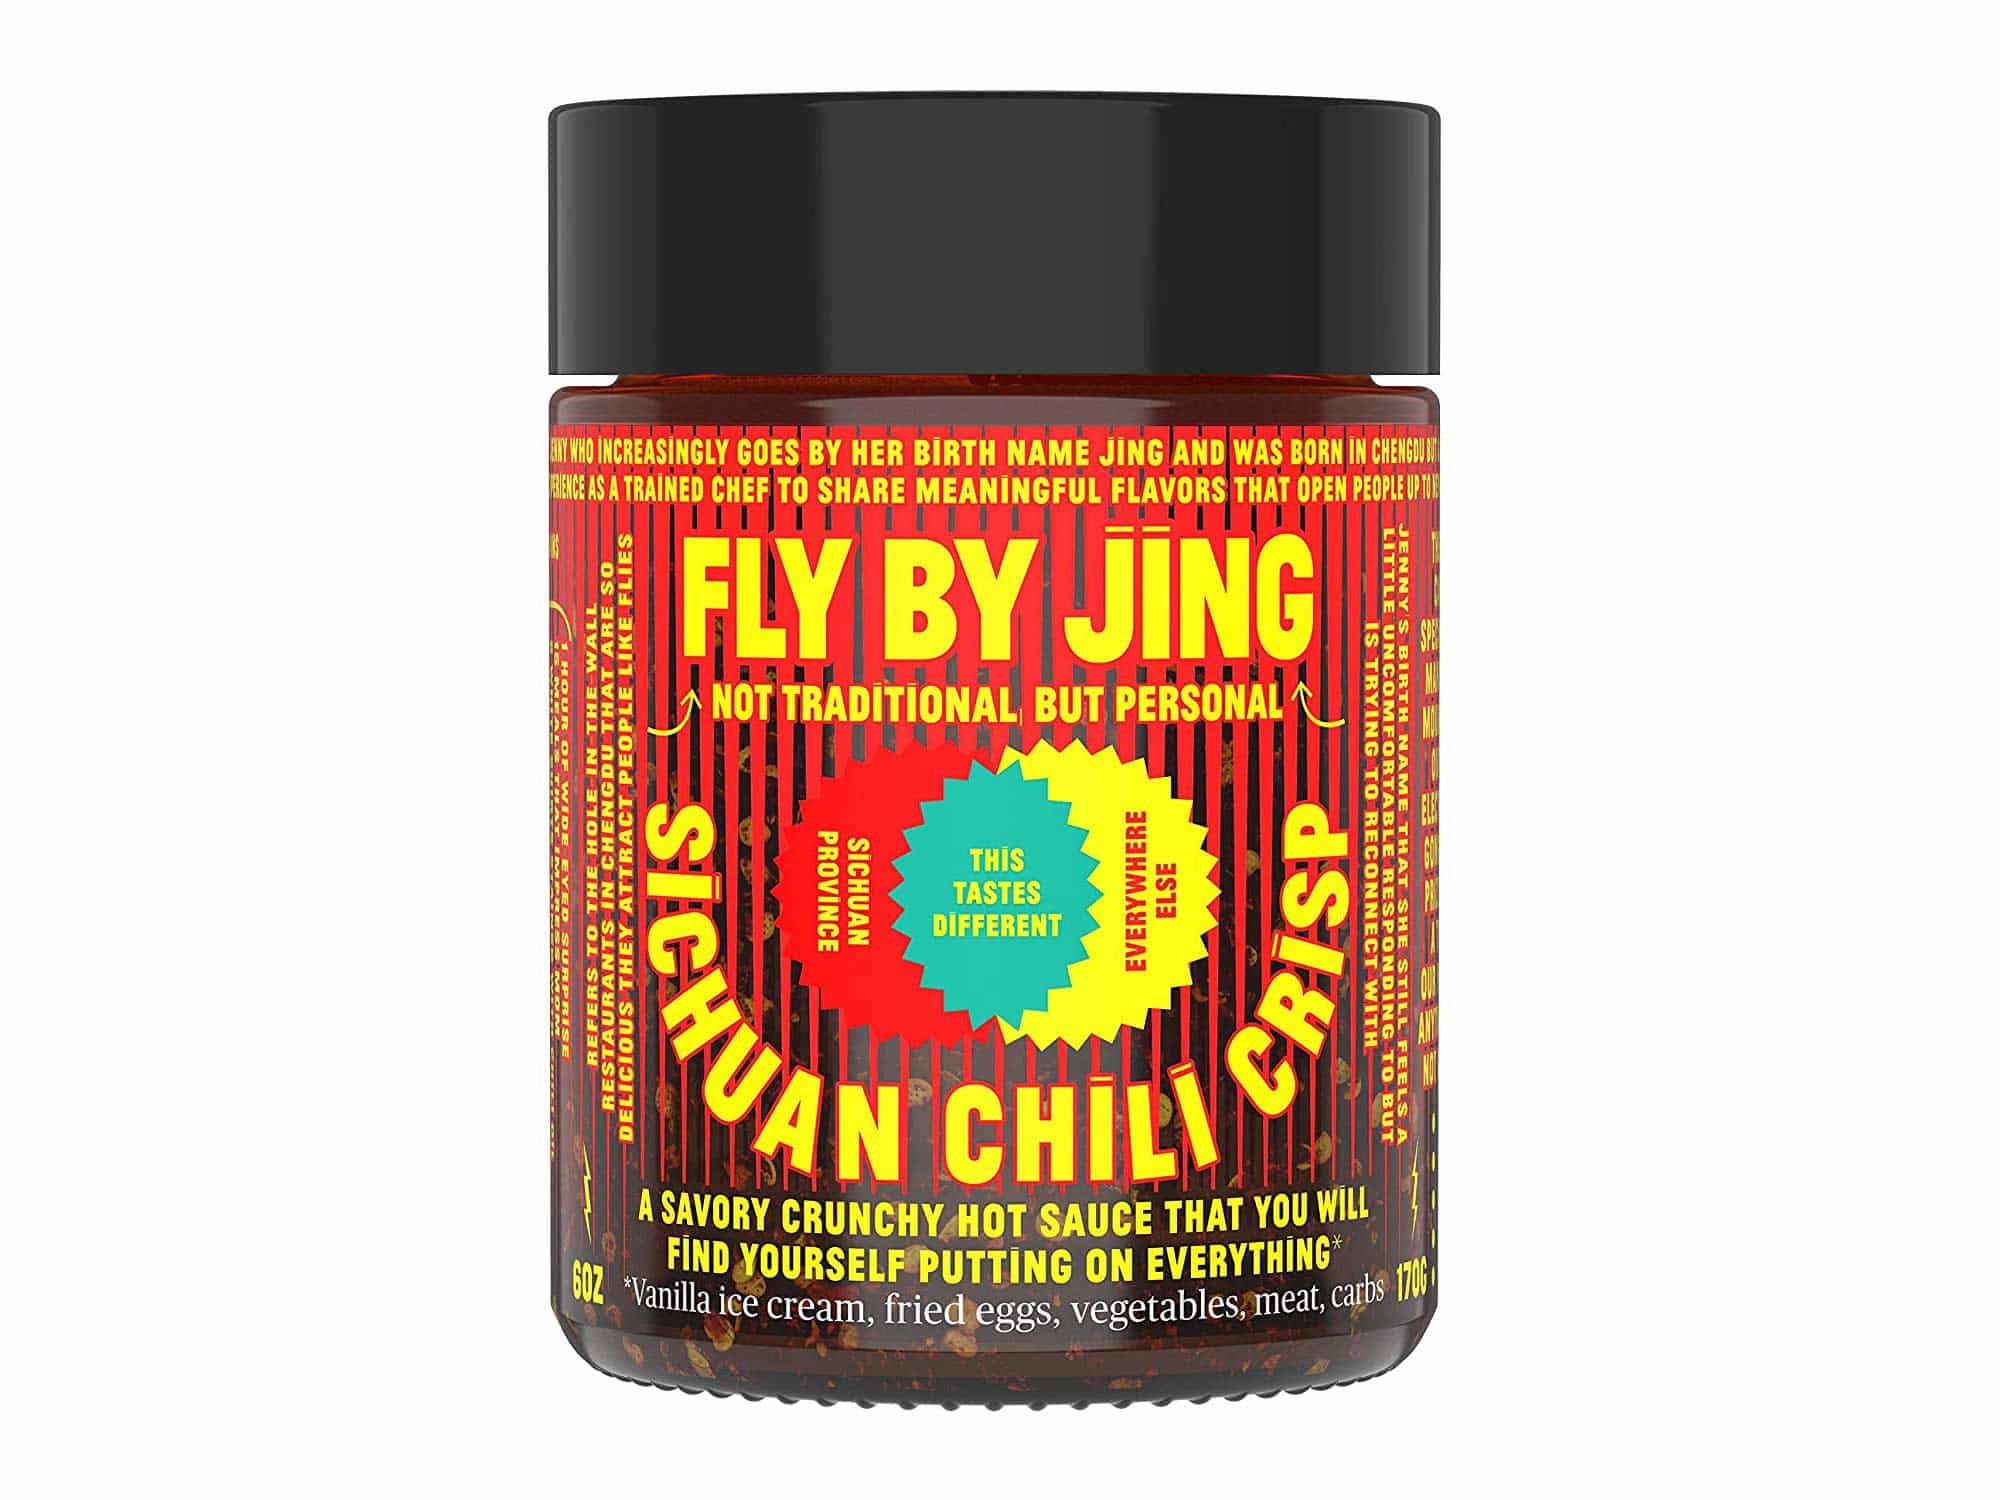 FLY BY JING Sichuan Chili Crisp 6oz, Deliciously Savory Umami Spicy Tingly Crispy Gourmet All Natural Vegan Gluten Free Hot Chili Oil Sauce with Sichuan Pepper, Good on Everything